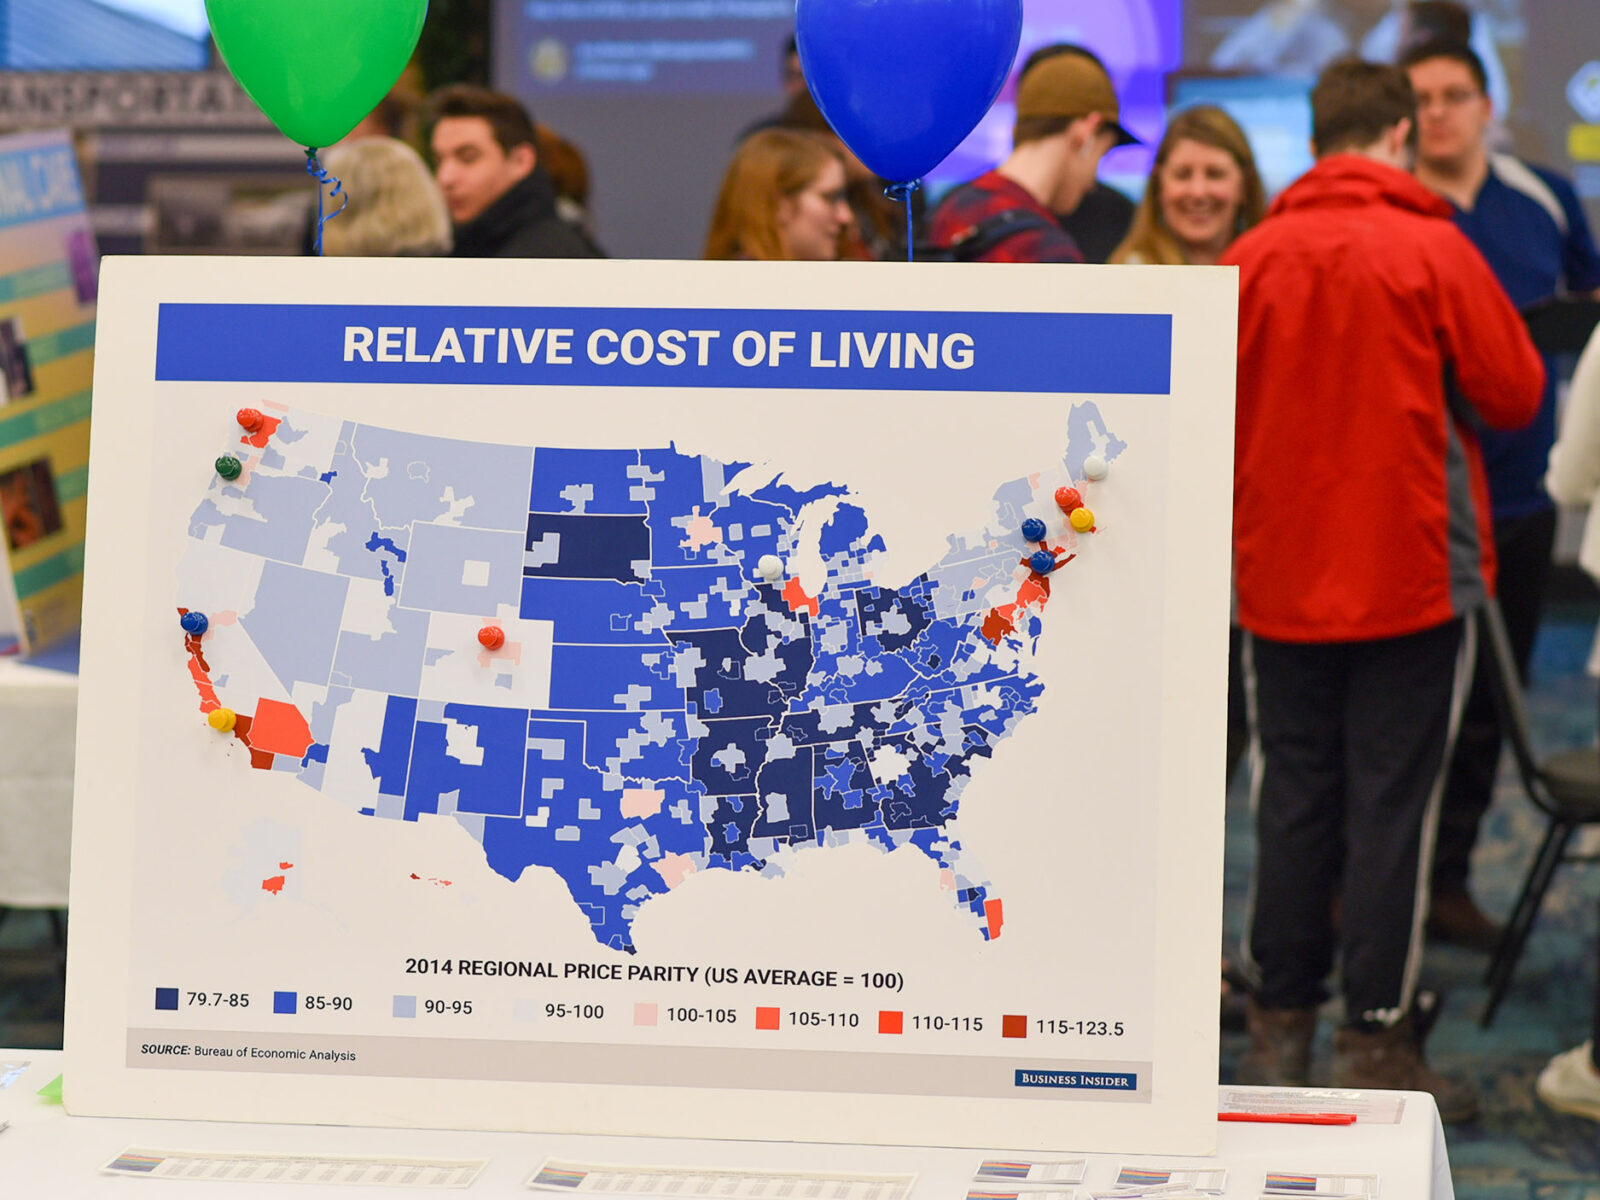 a poster with a map of the US showing cost of living in different areas